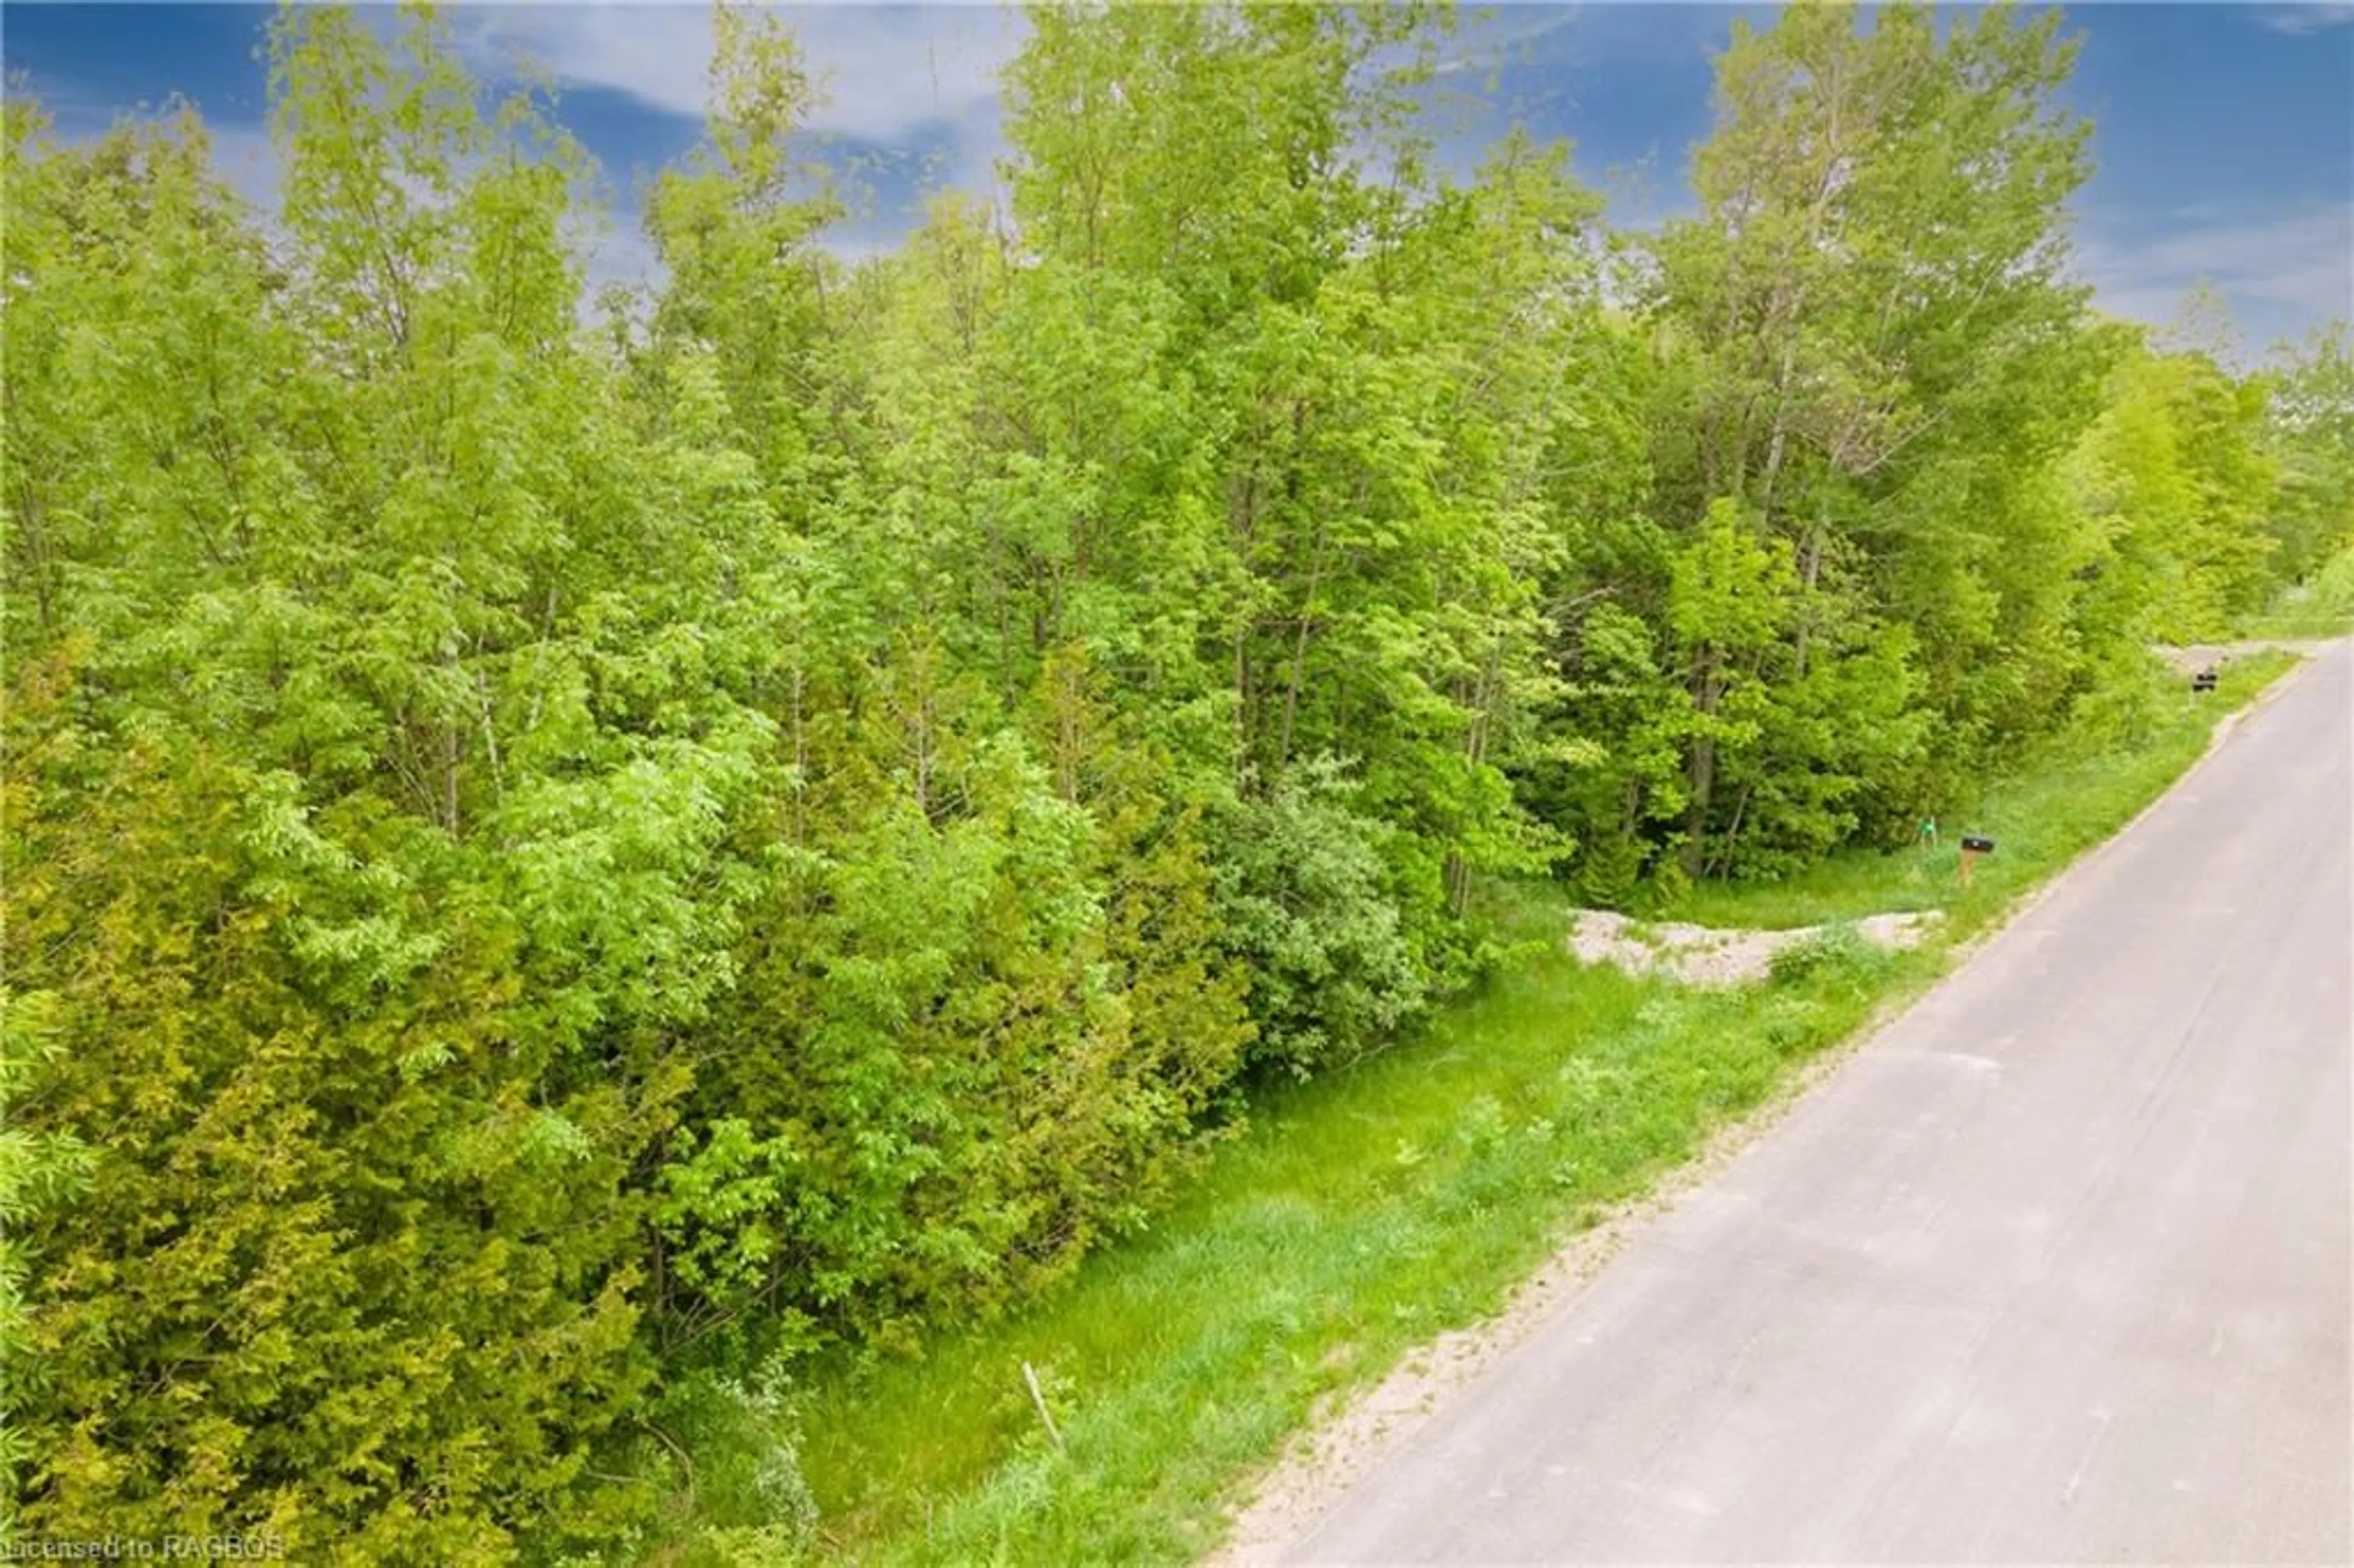 Street view for 63 Maple Dr, Northern Bruce Peninsula Ontario N0H 1Z0